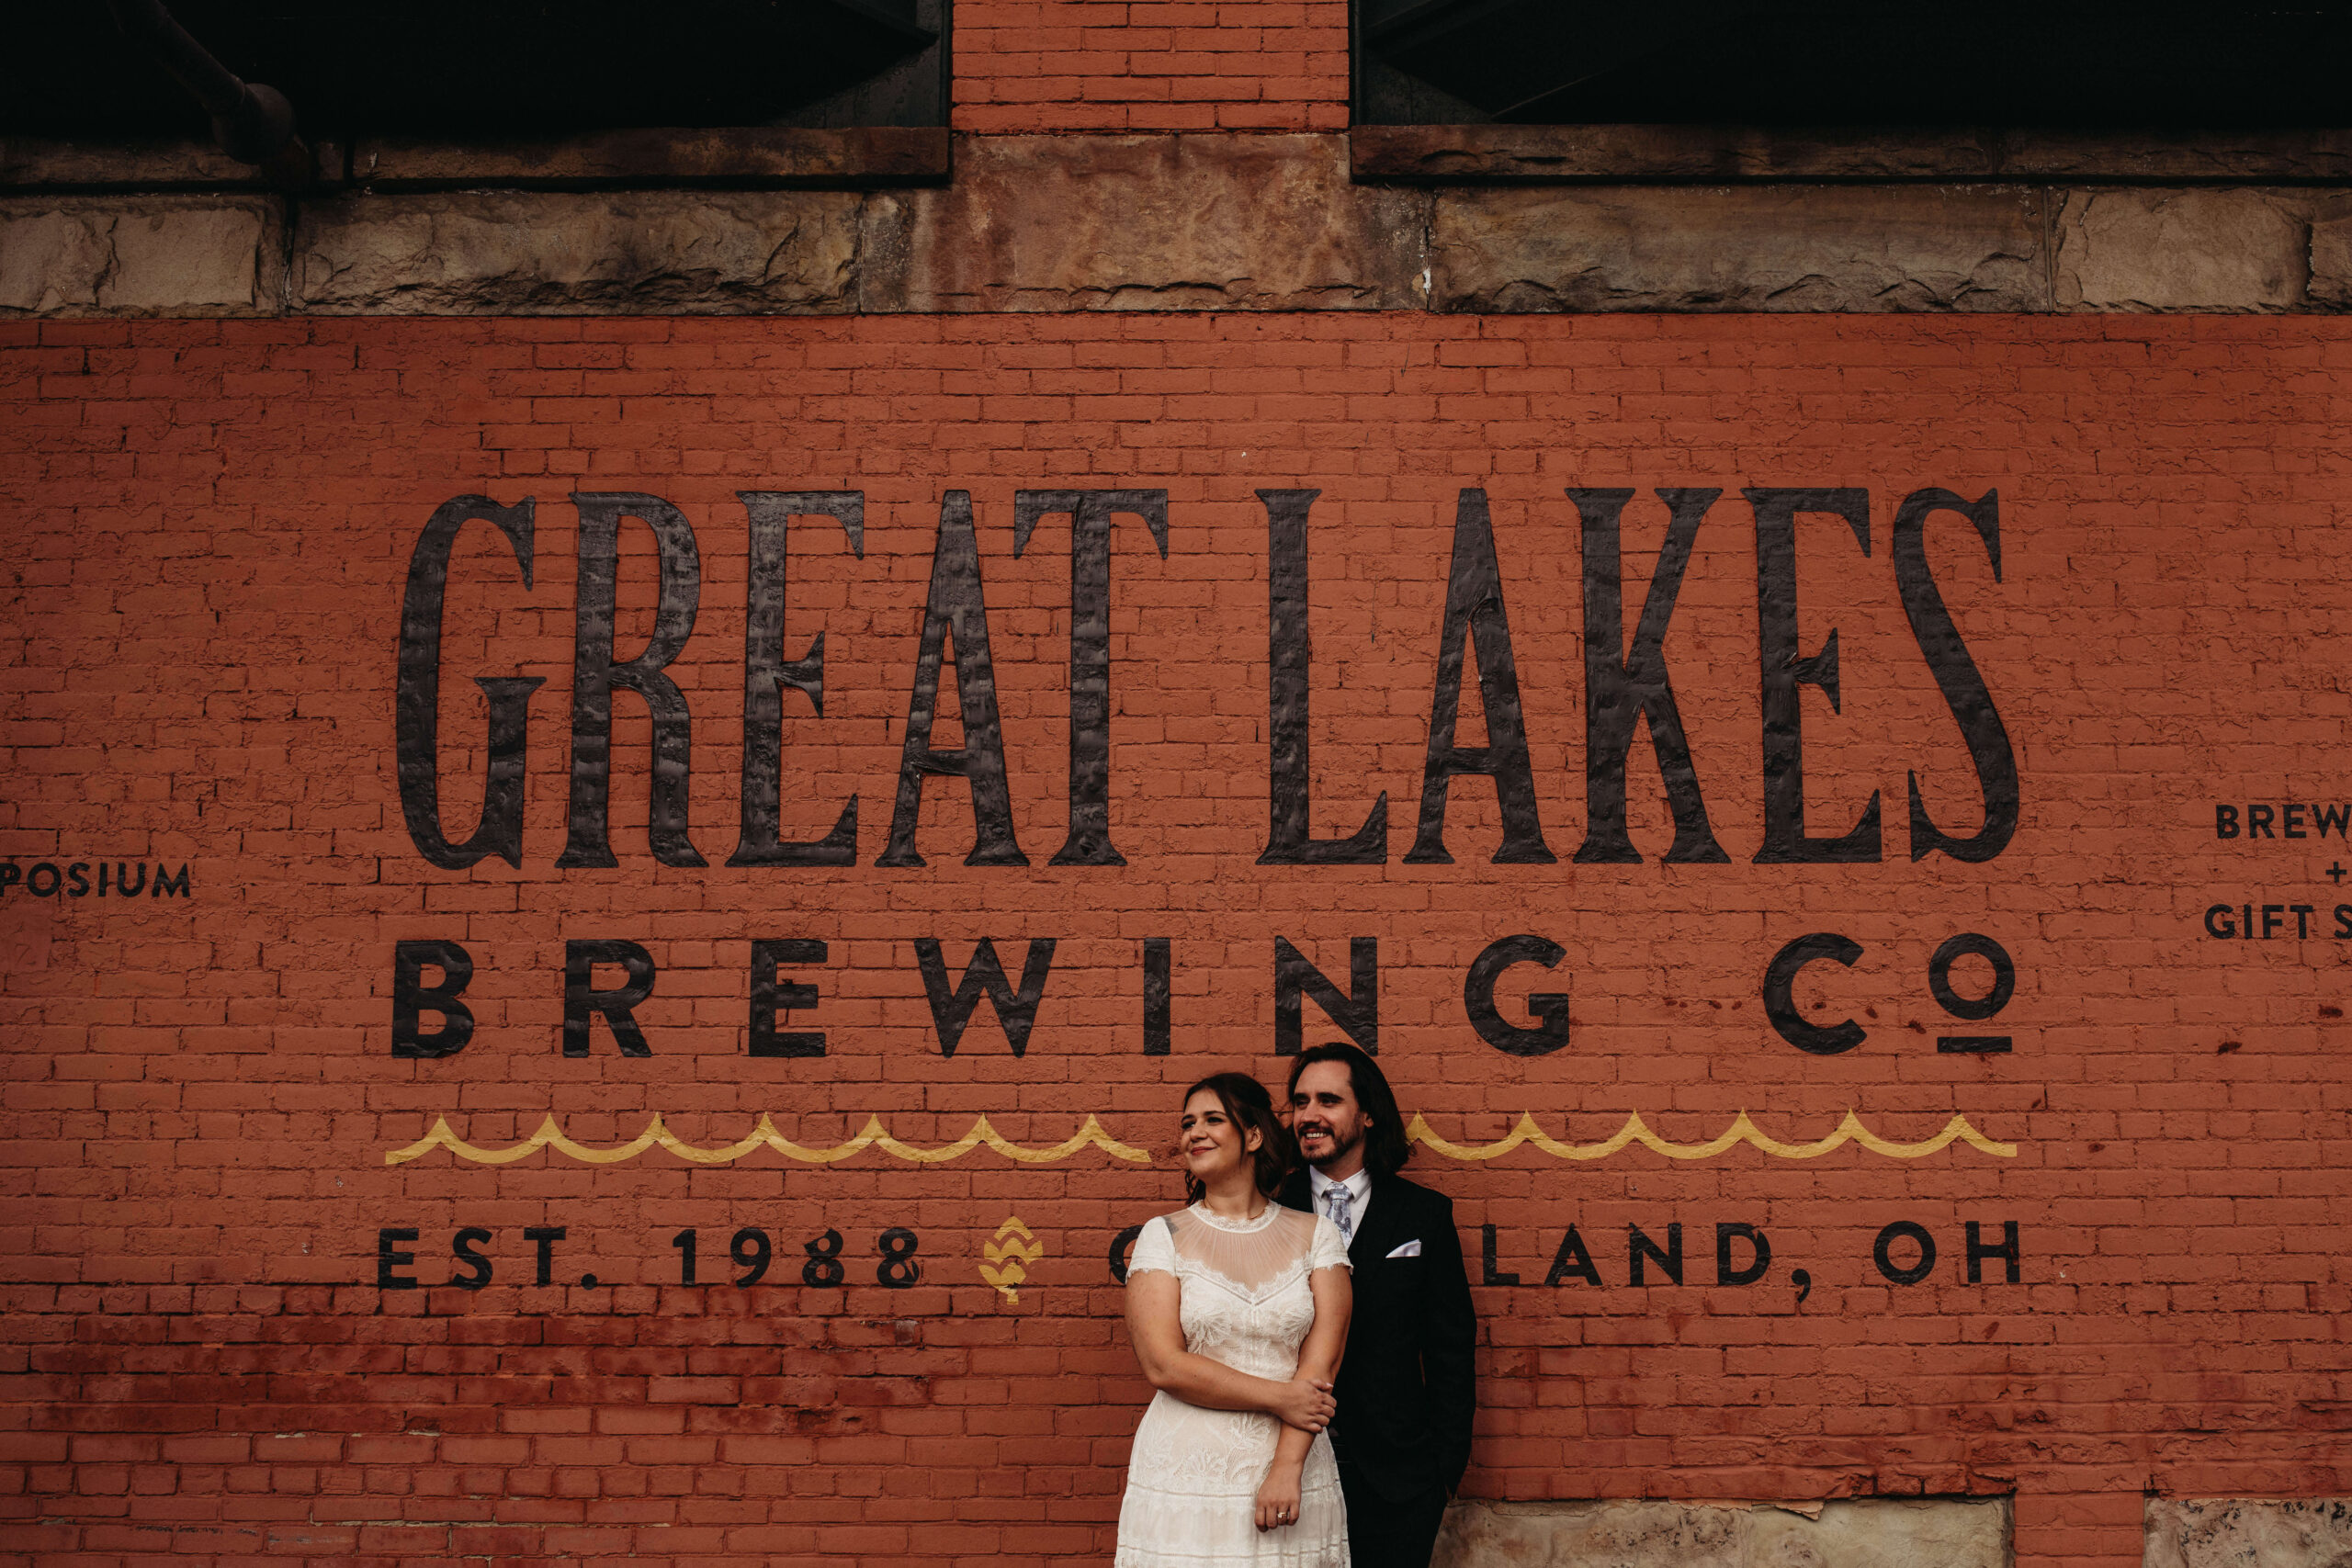 Couple stand in front of Great Lakes Mural in Ohio City during a summer reception.